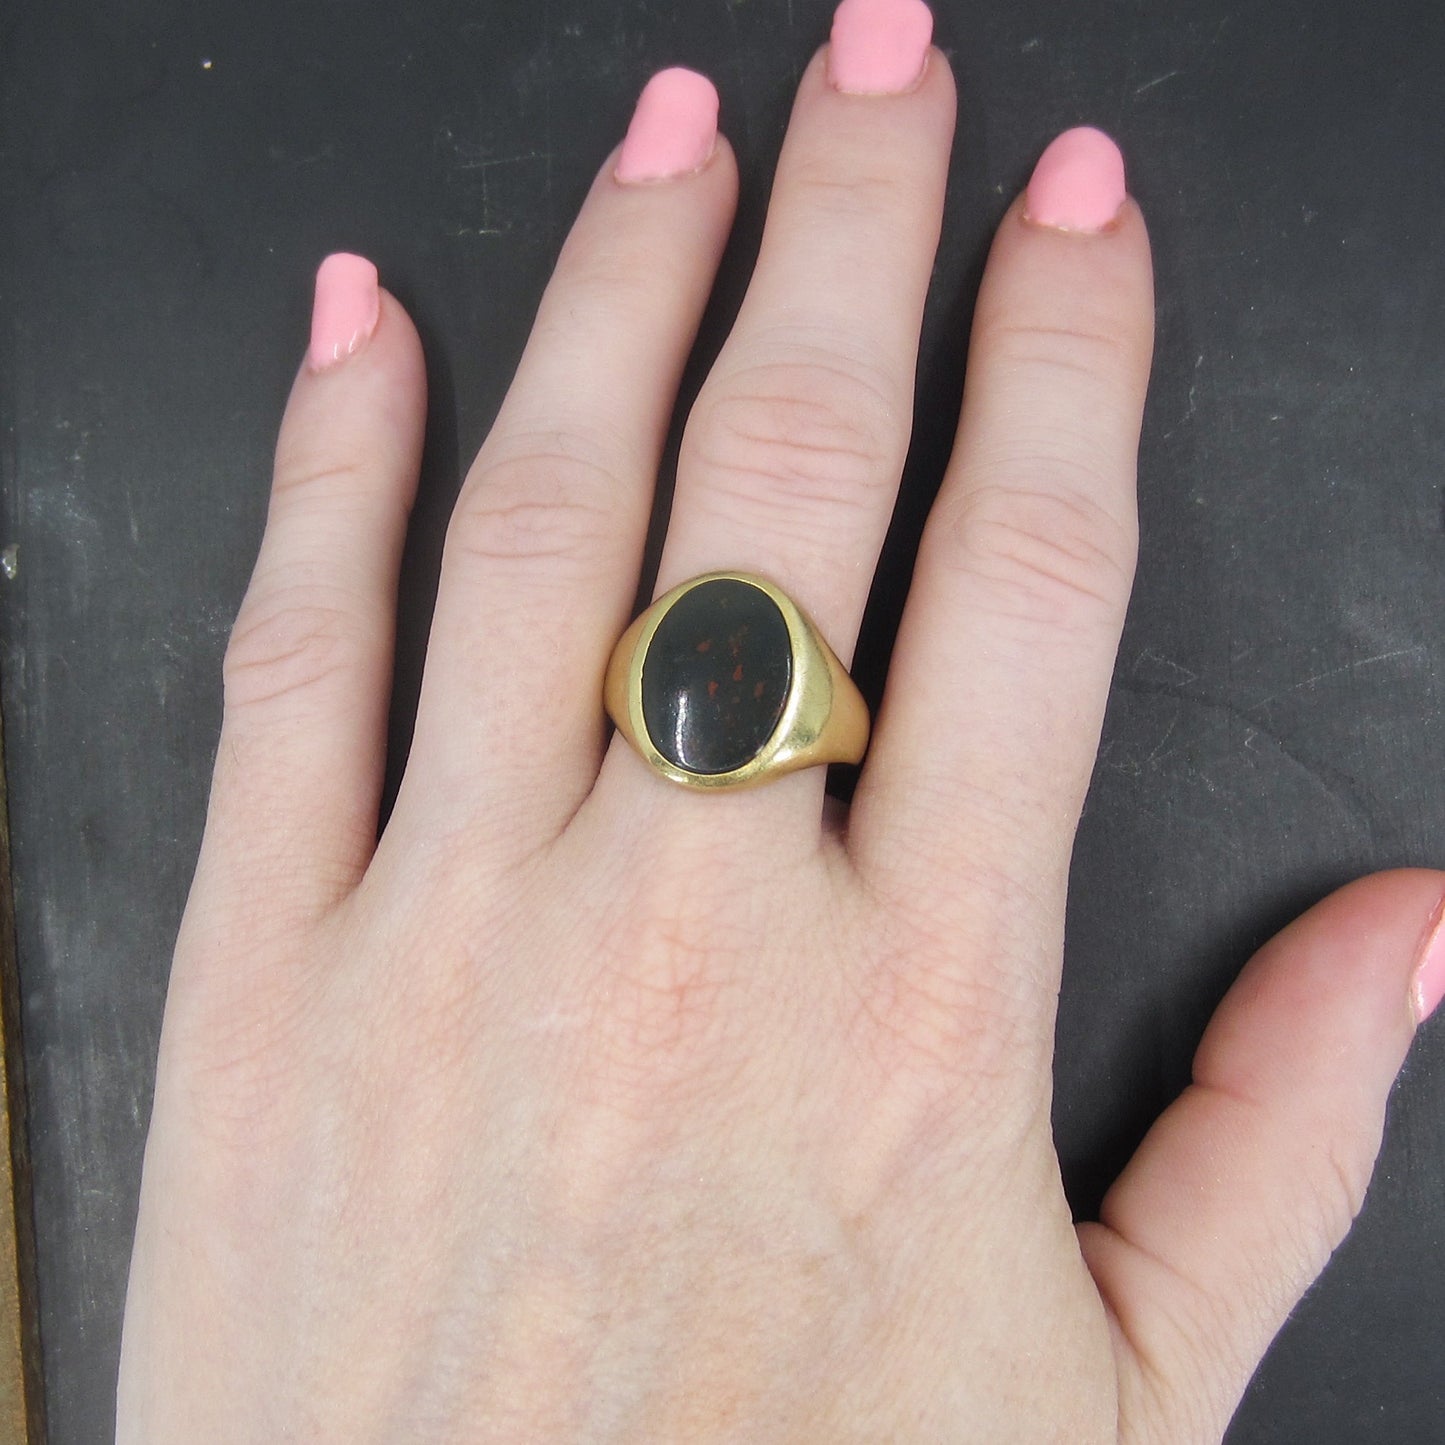 SOLD-Late Victorian Bloodstone Signet Ring 14k c. 1900